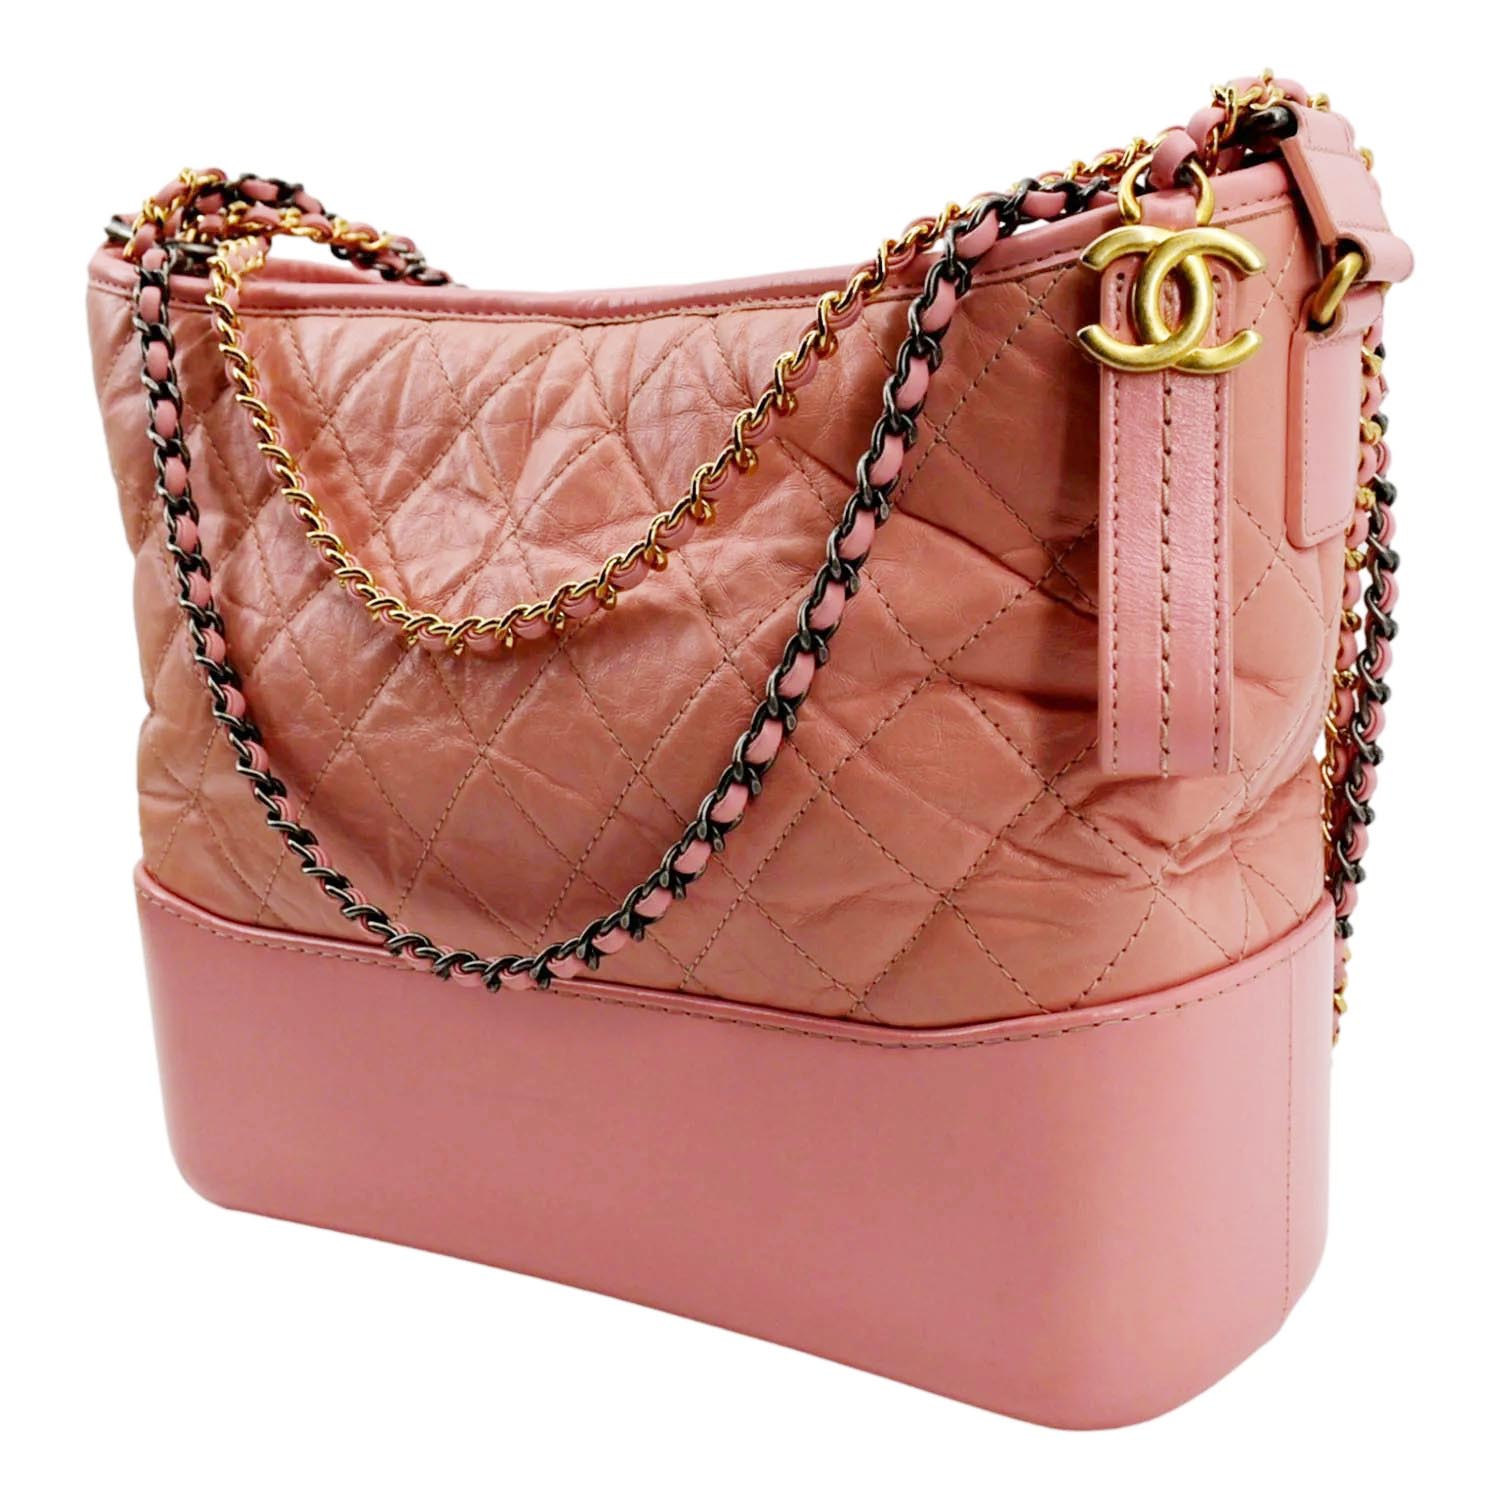 CHANEL, Bags, Chanel Calfskin Quilted Medium Gabrielle Hobo Bag